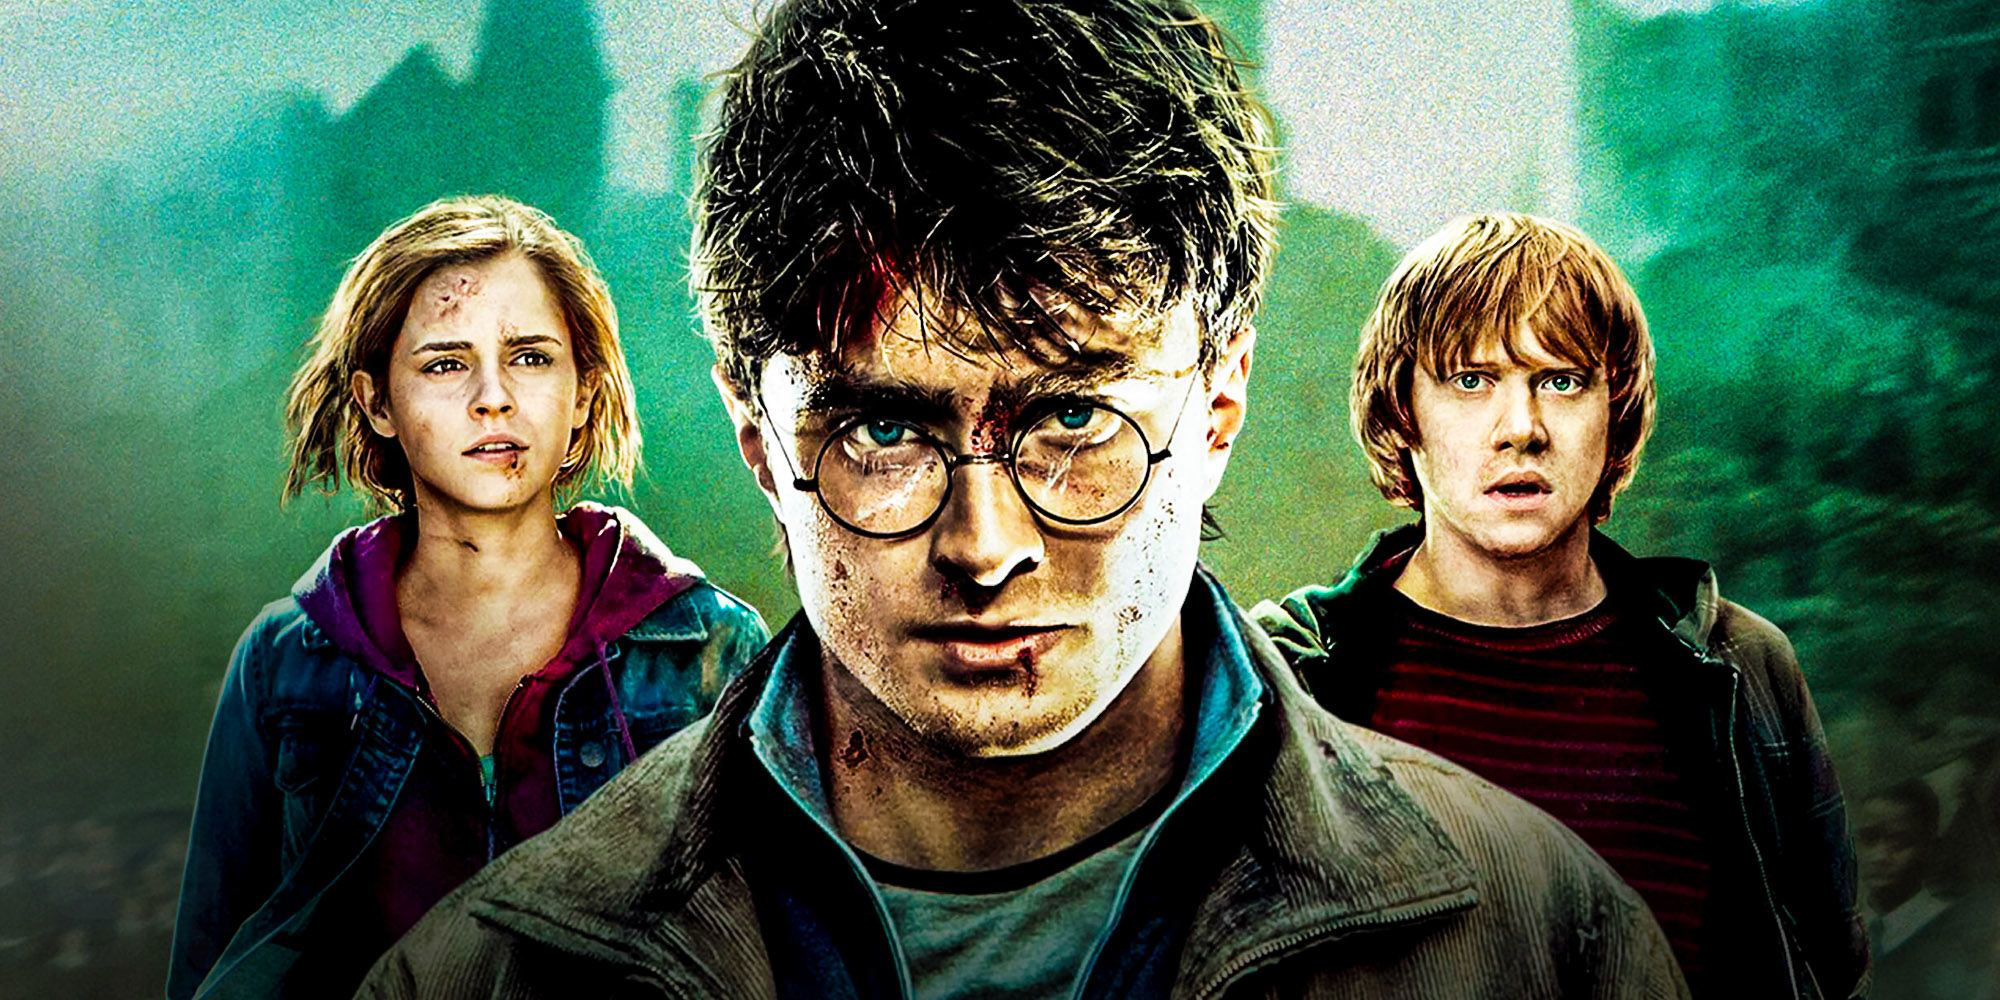 Harry Potter And The Deathly Hallows Part 2: Ending Explained